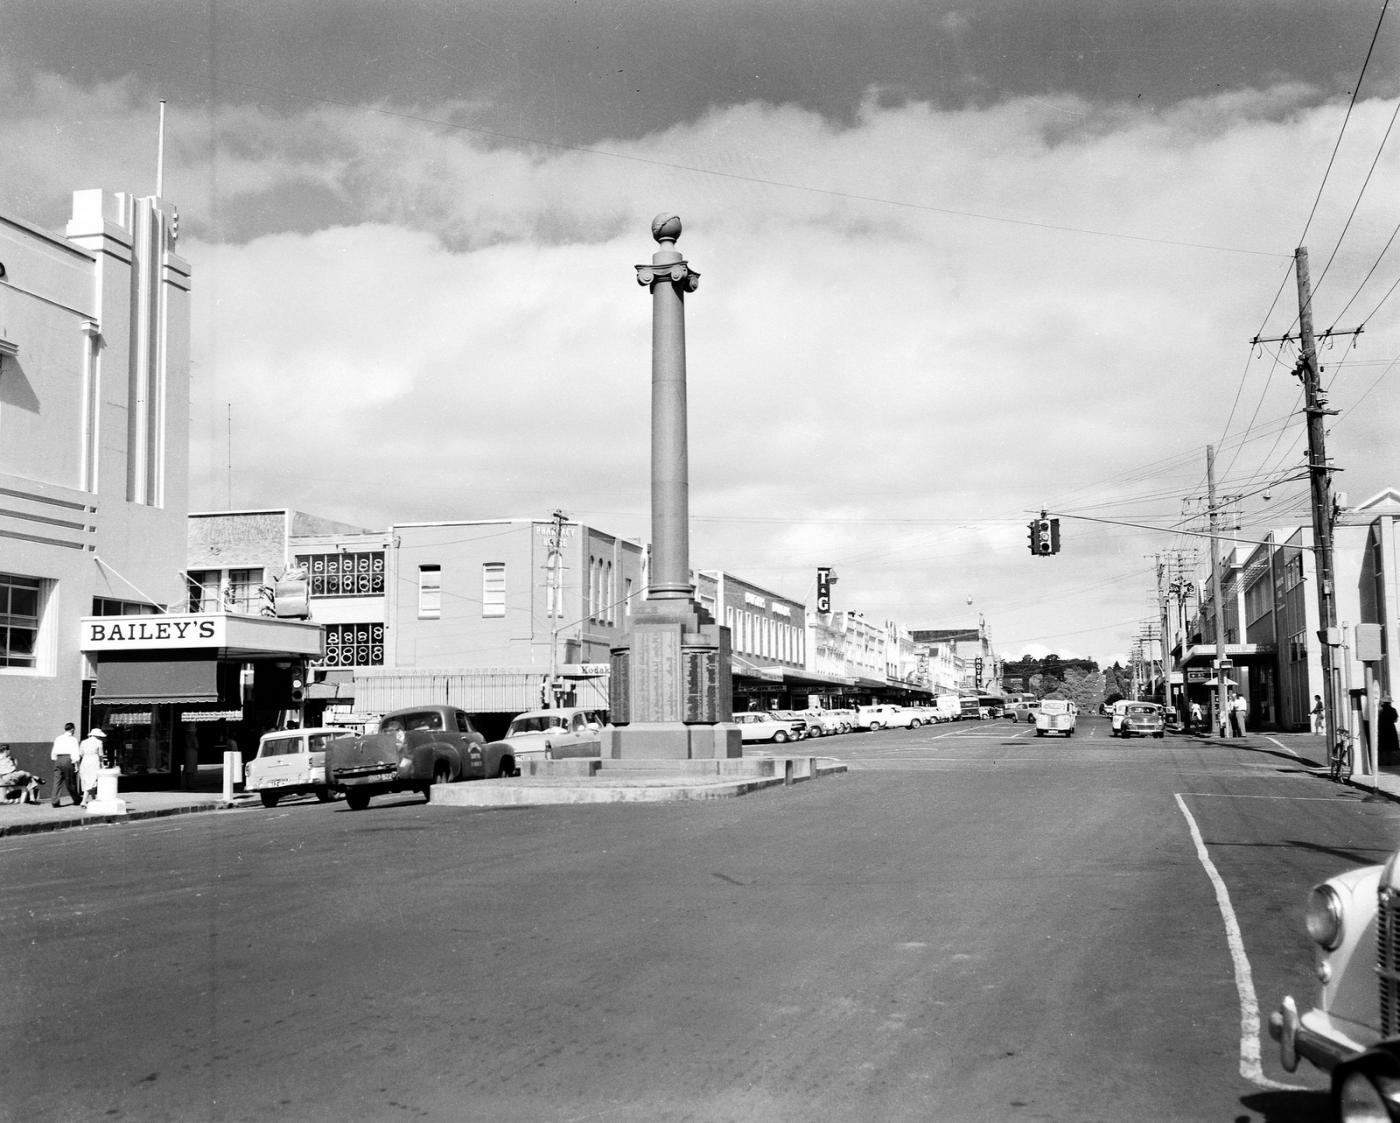 View of a wide street with a large monument in the middle of the road